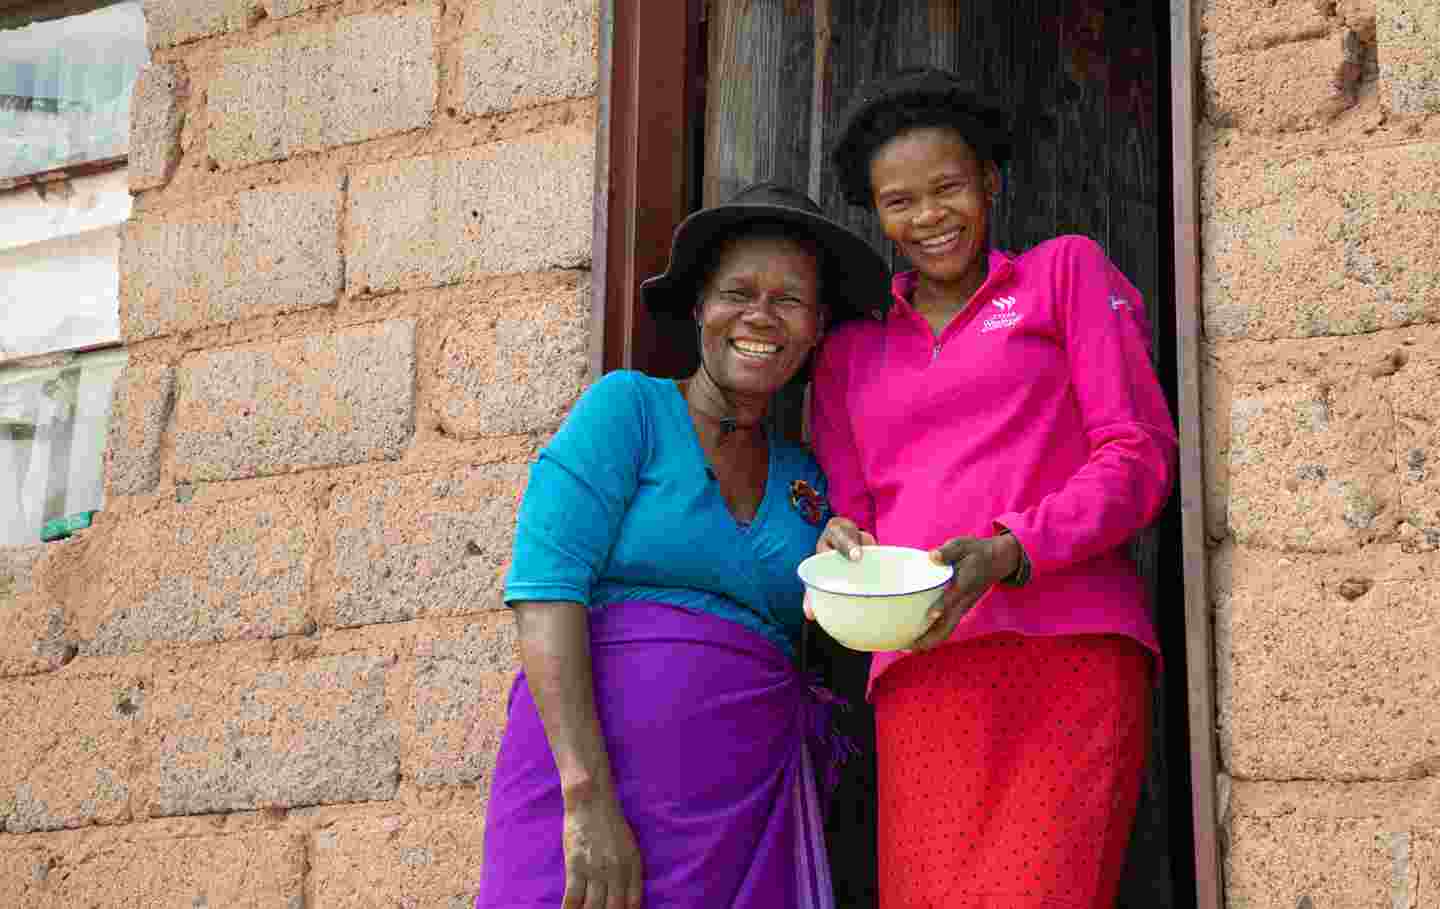 Two people smiling in front of their home in Eswatini.